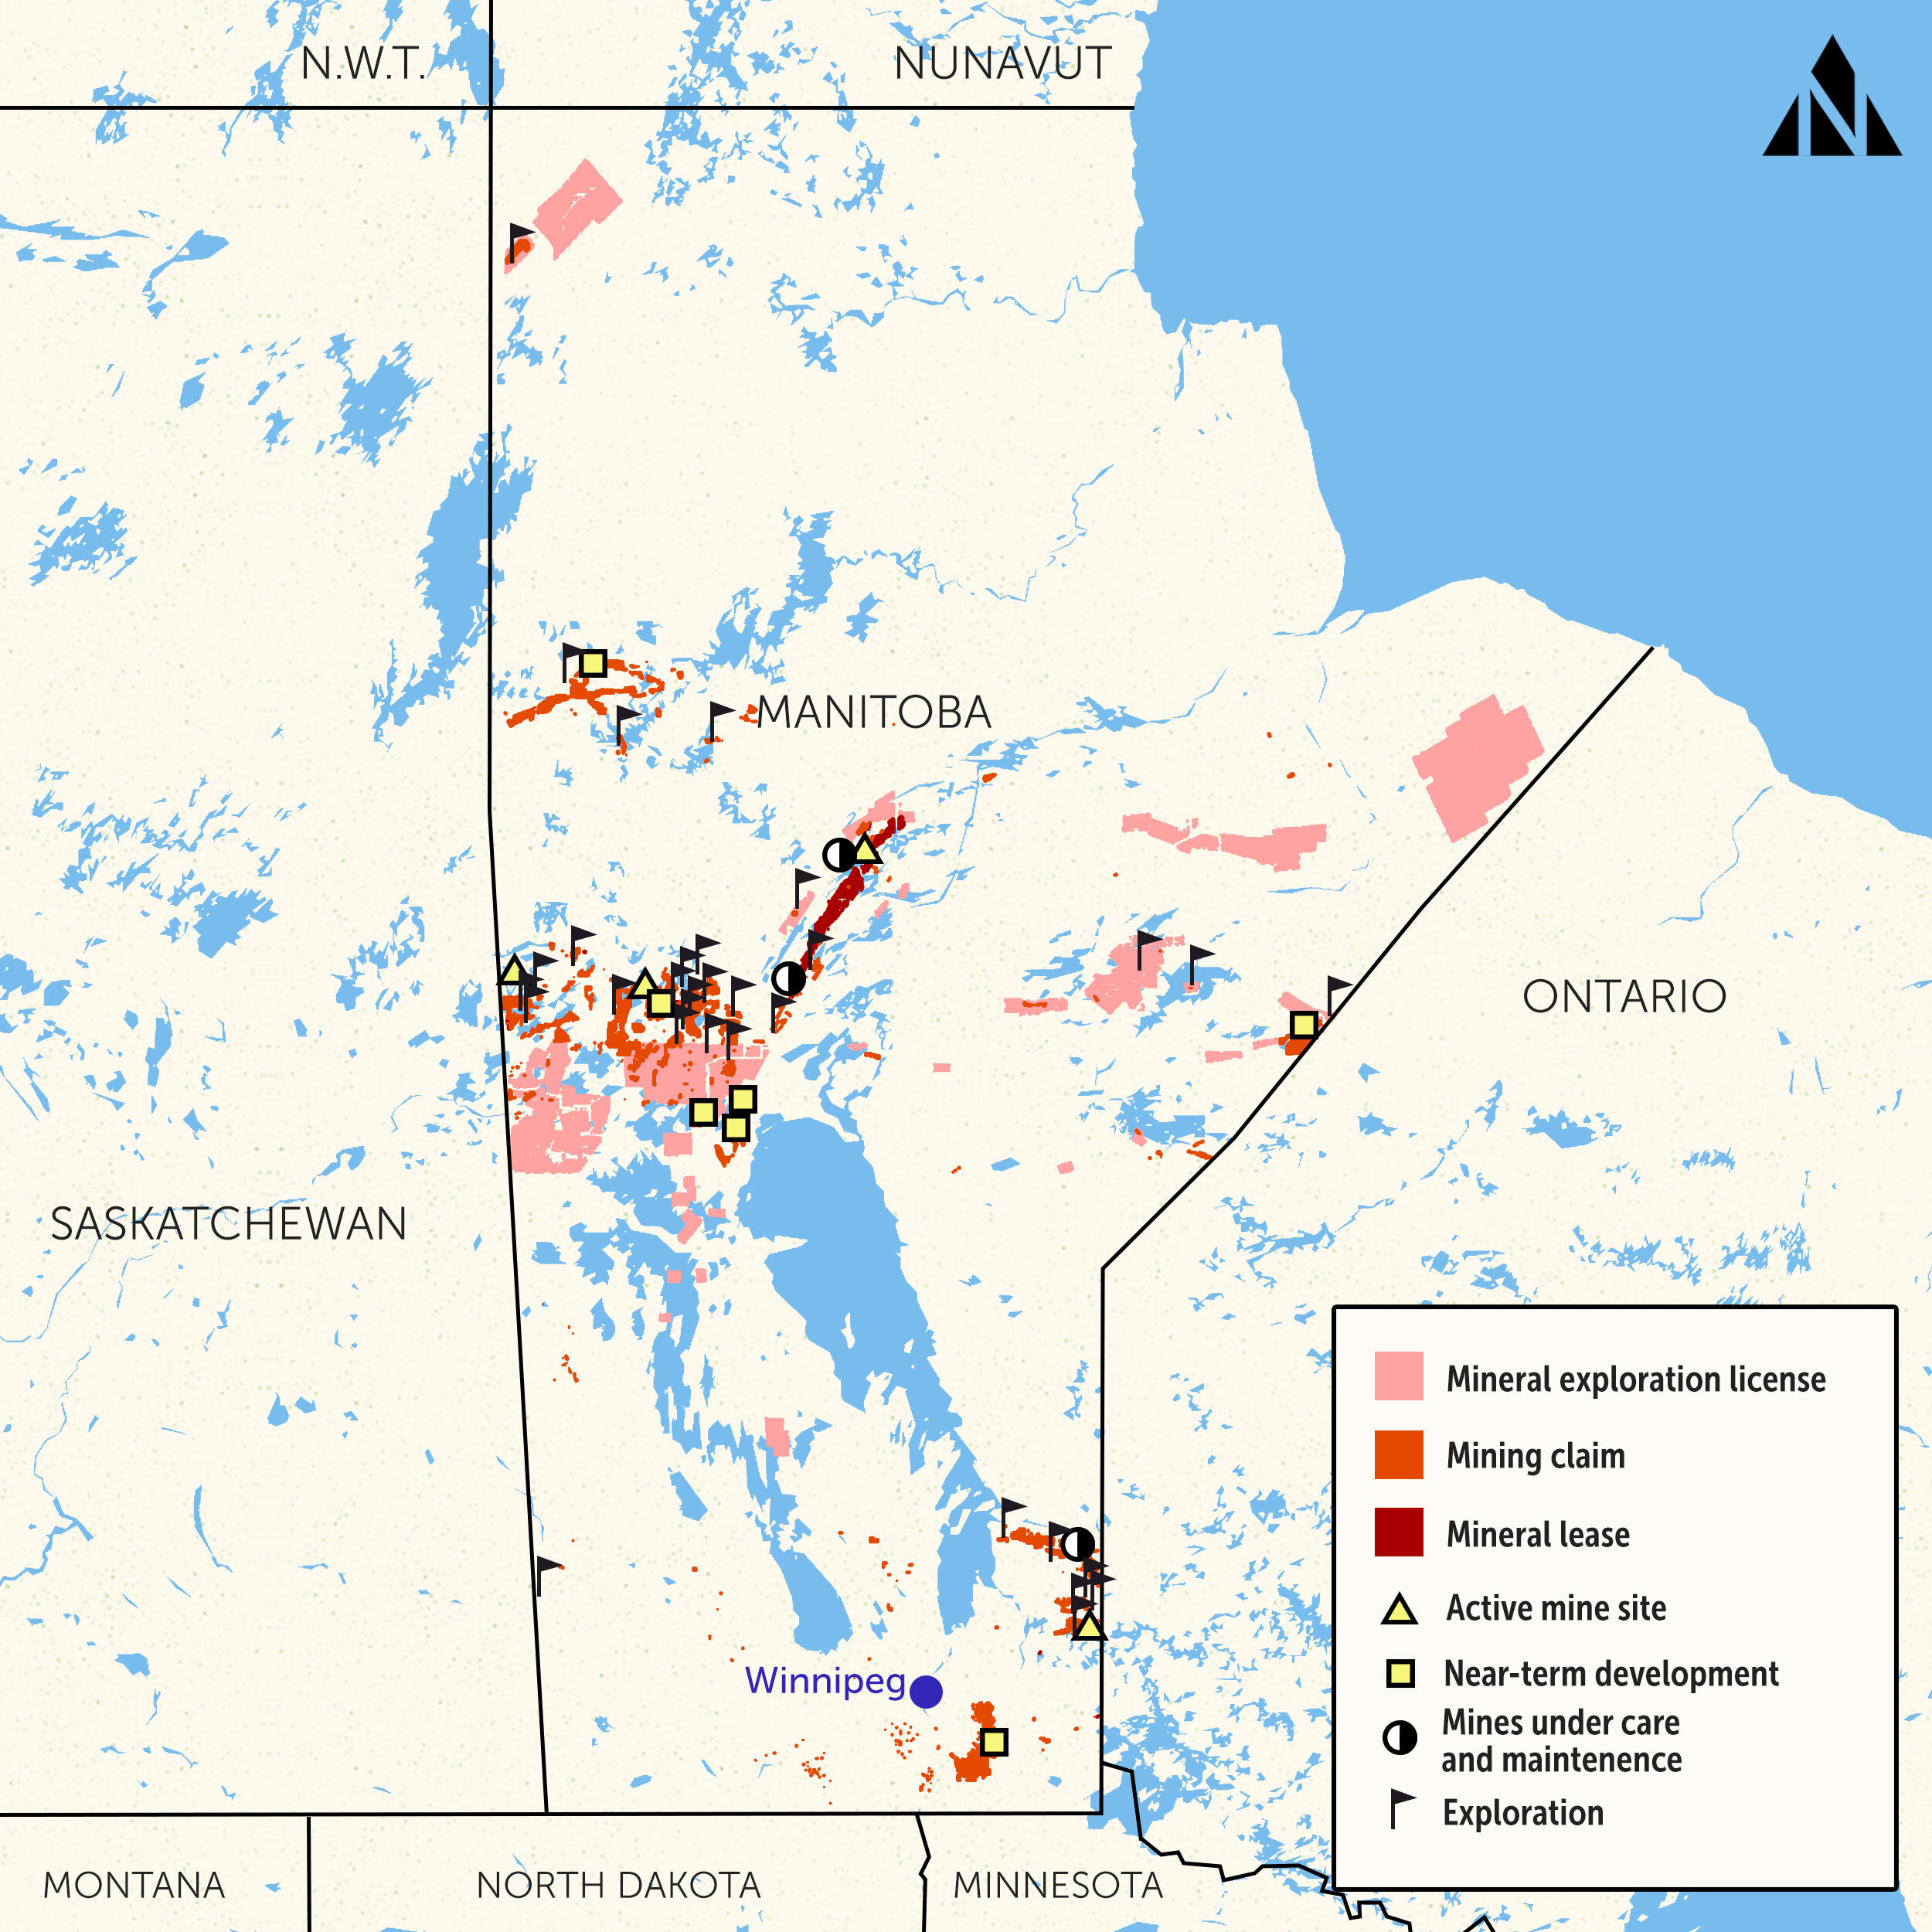 Map showing Manitoba landforms with markers for mines, leases and exploration